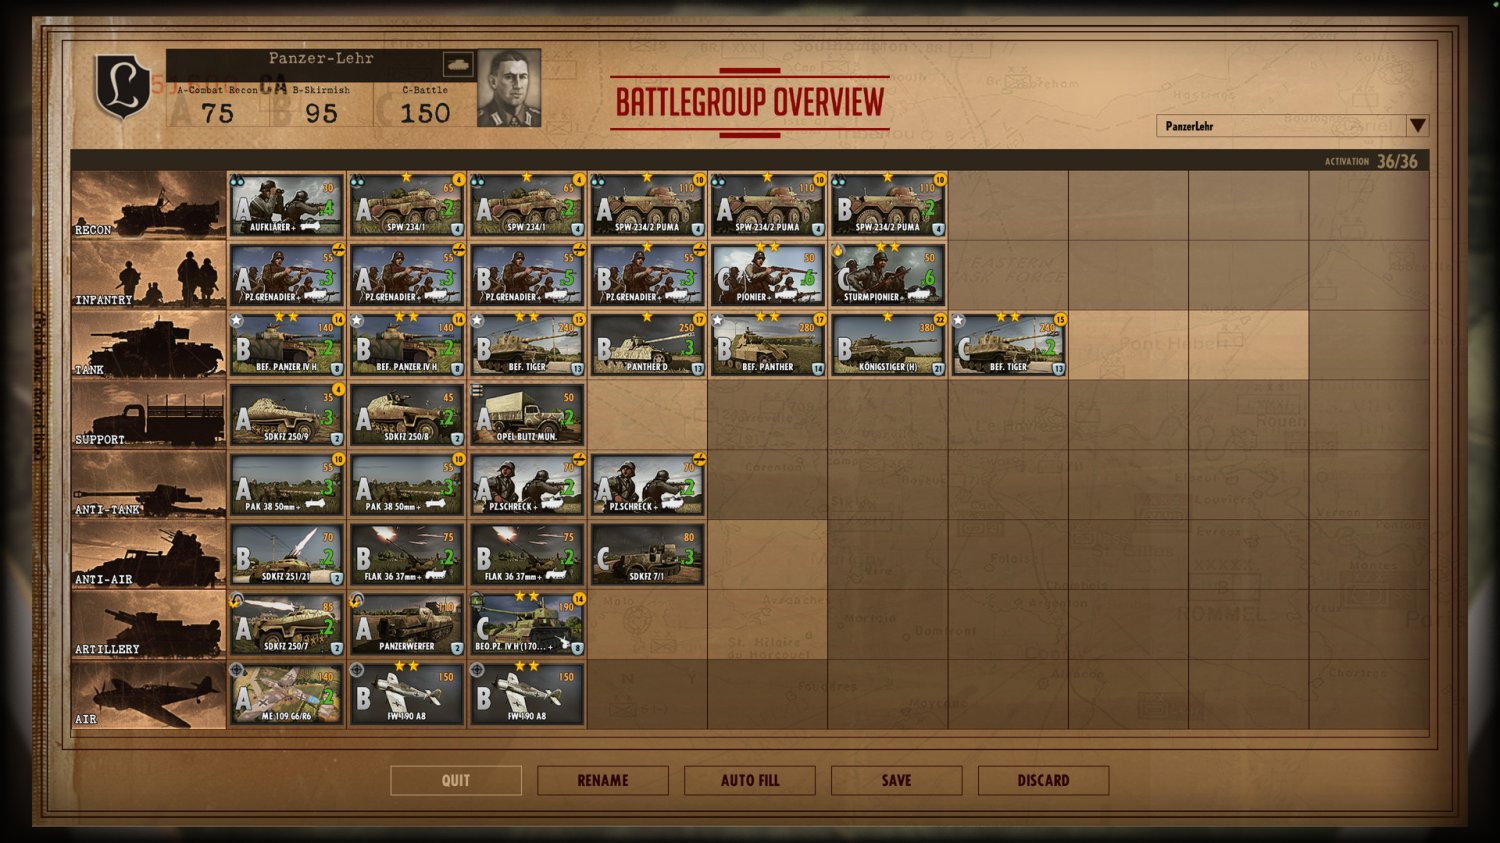 download free steel division normandy 44 steam